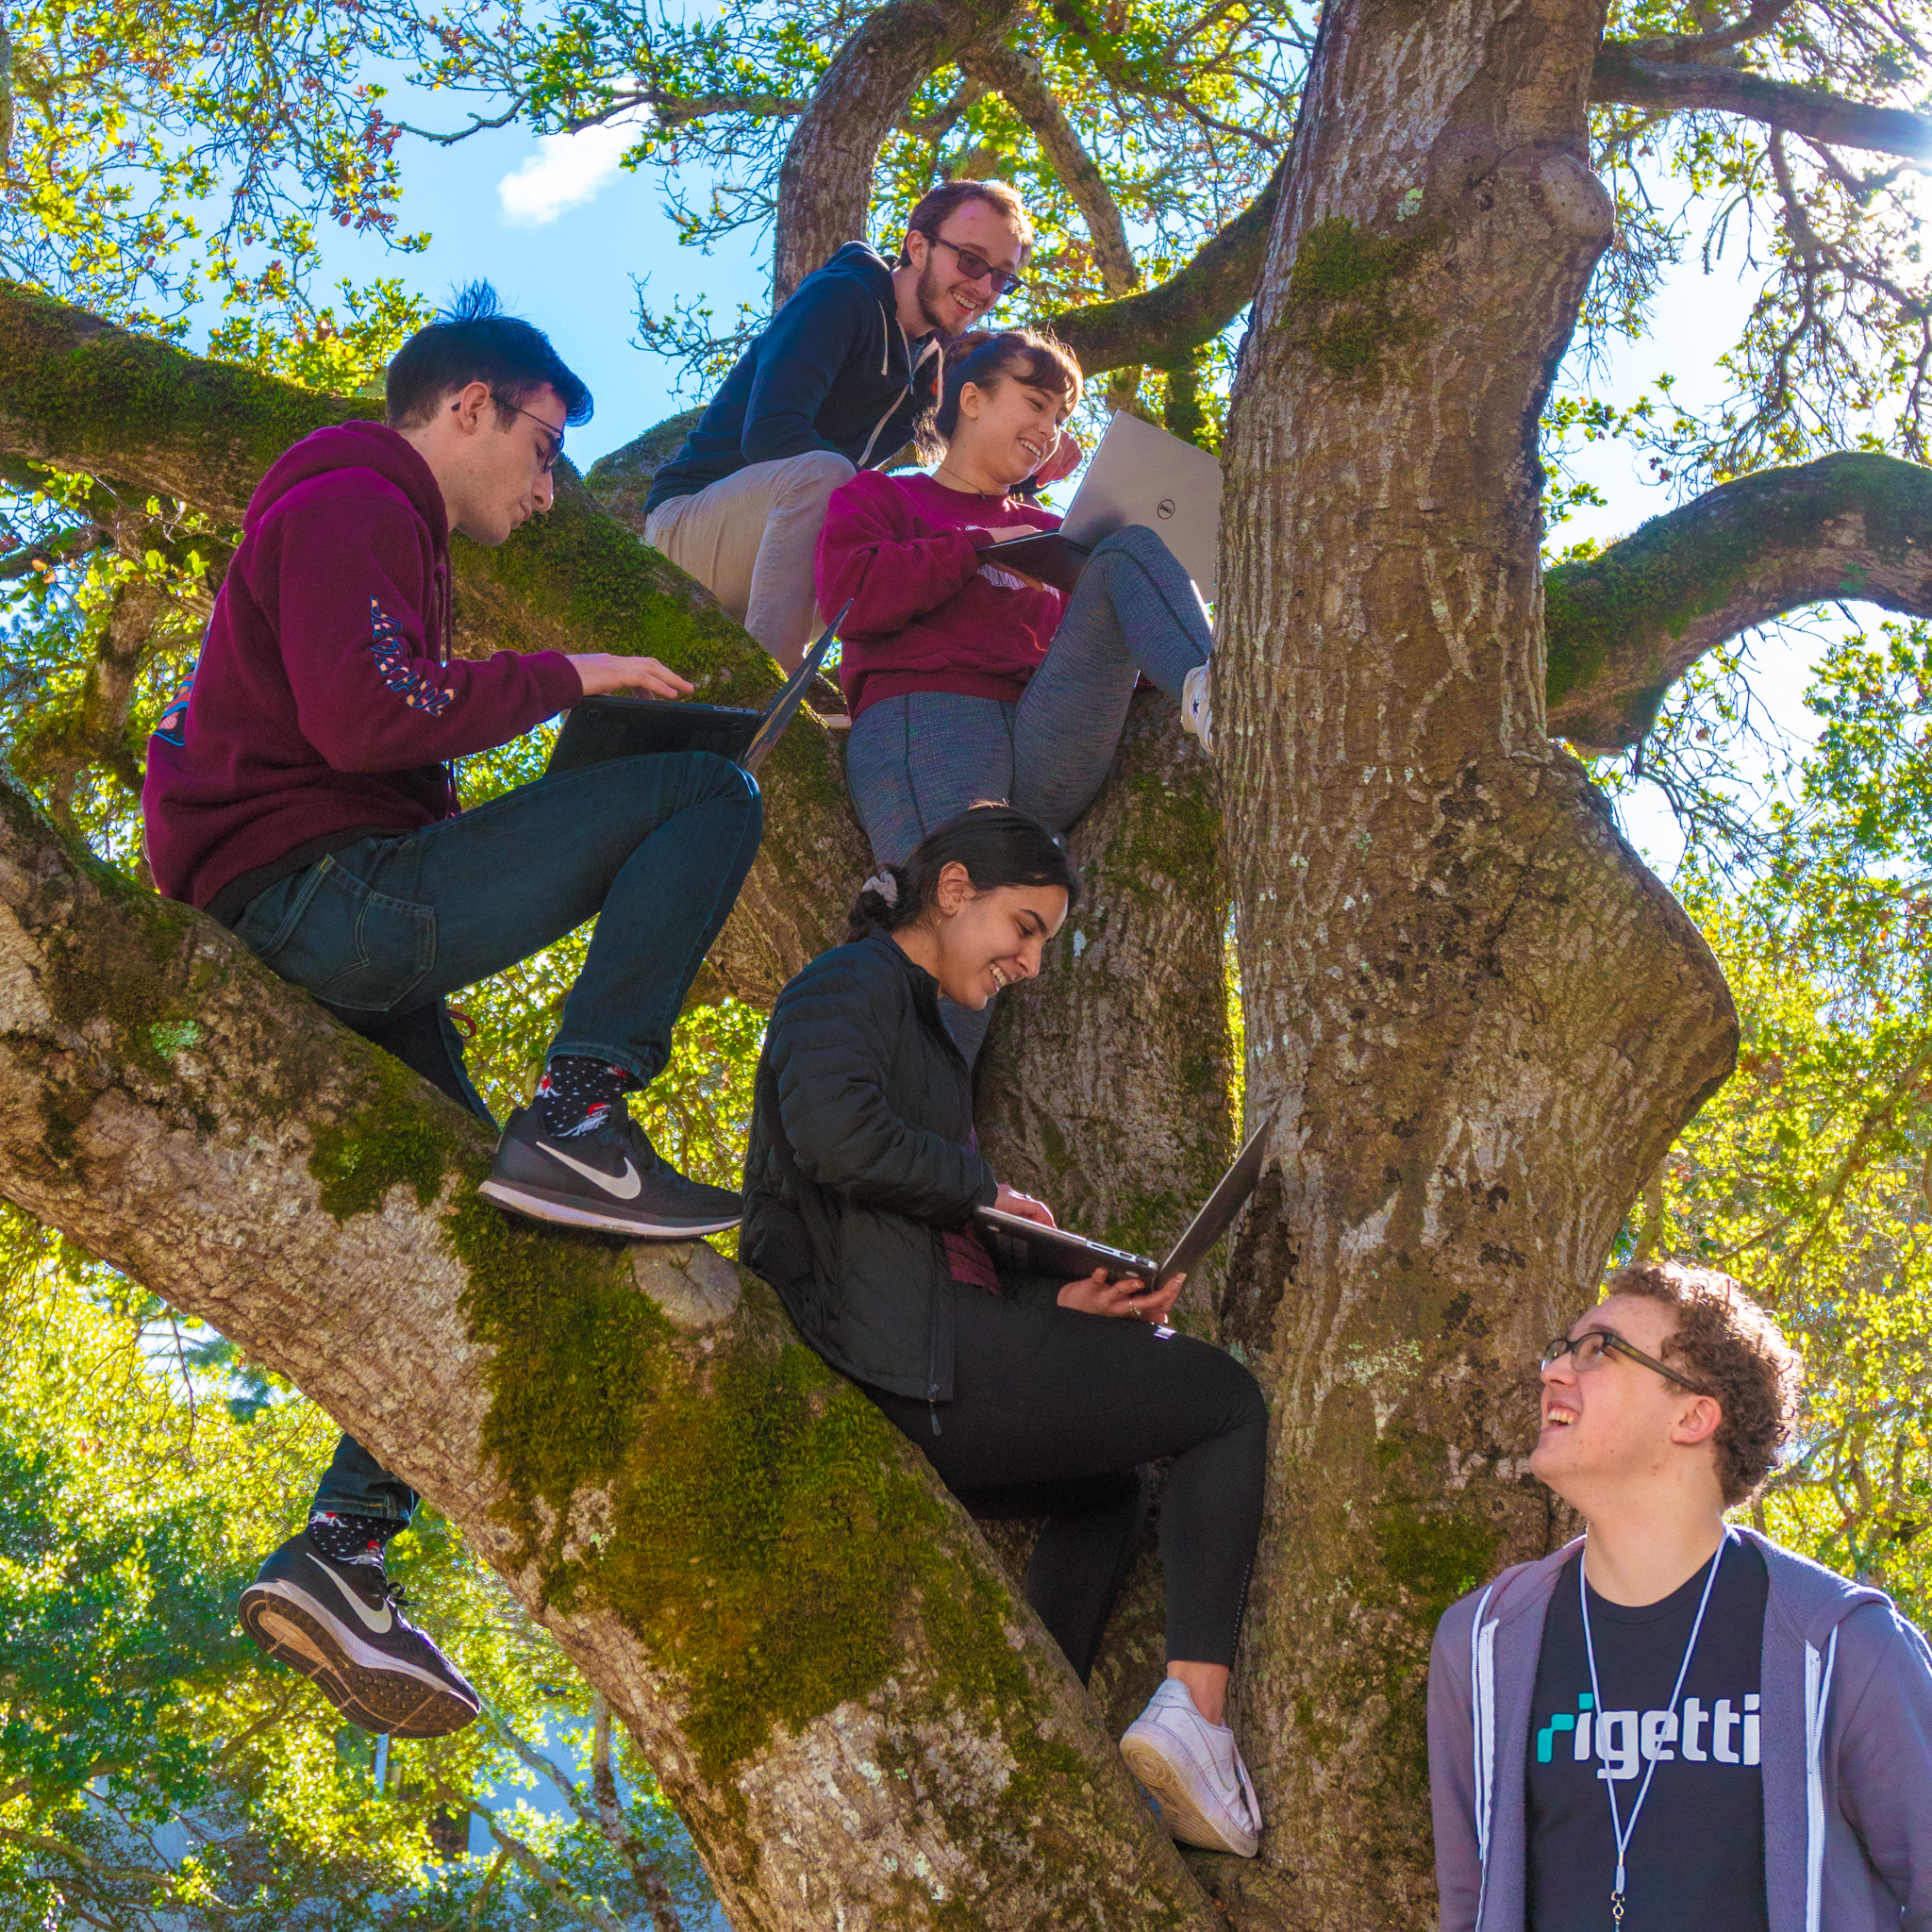 CruzHacks participants work on their projects in a tree!